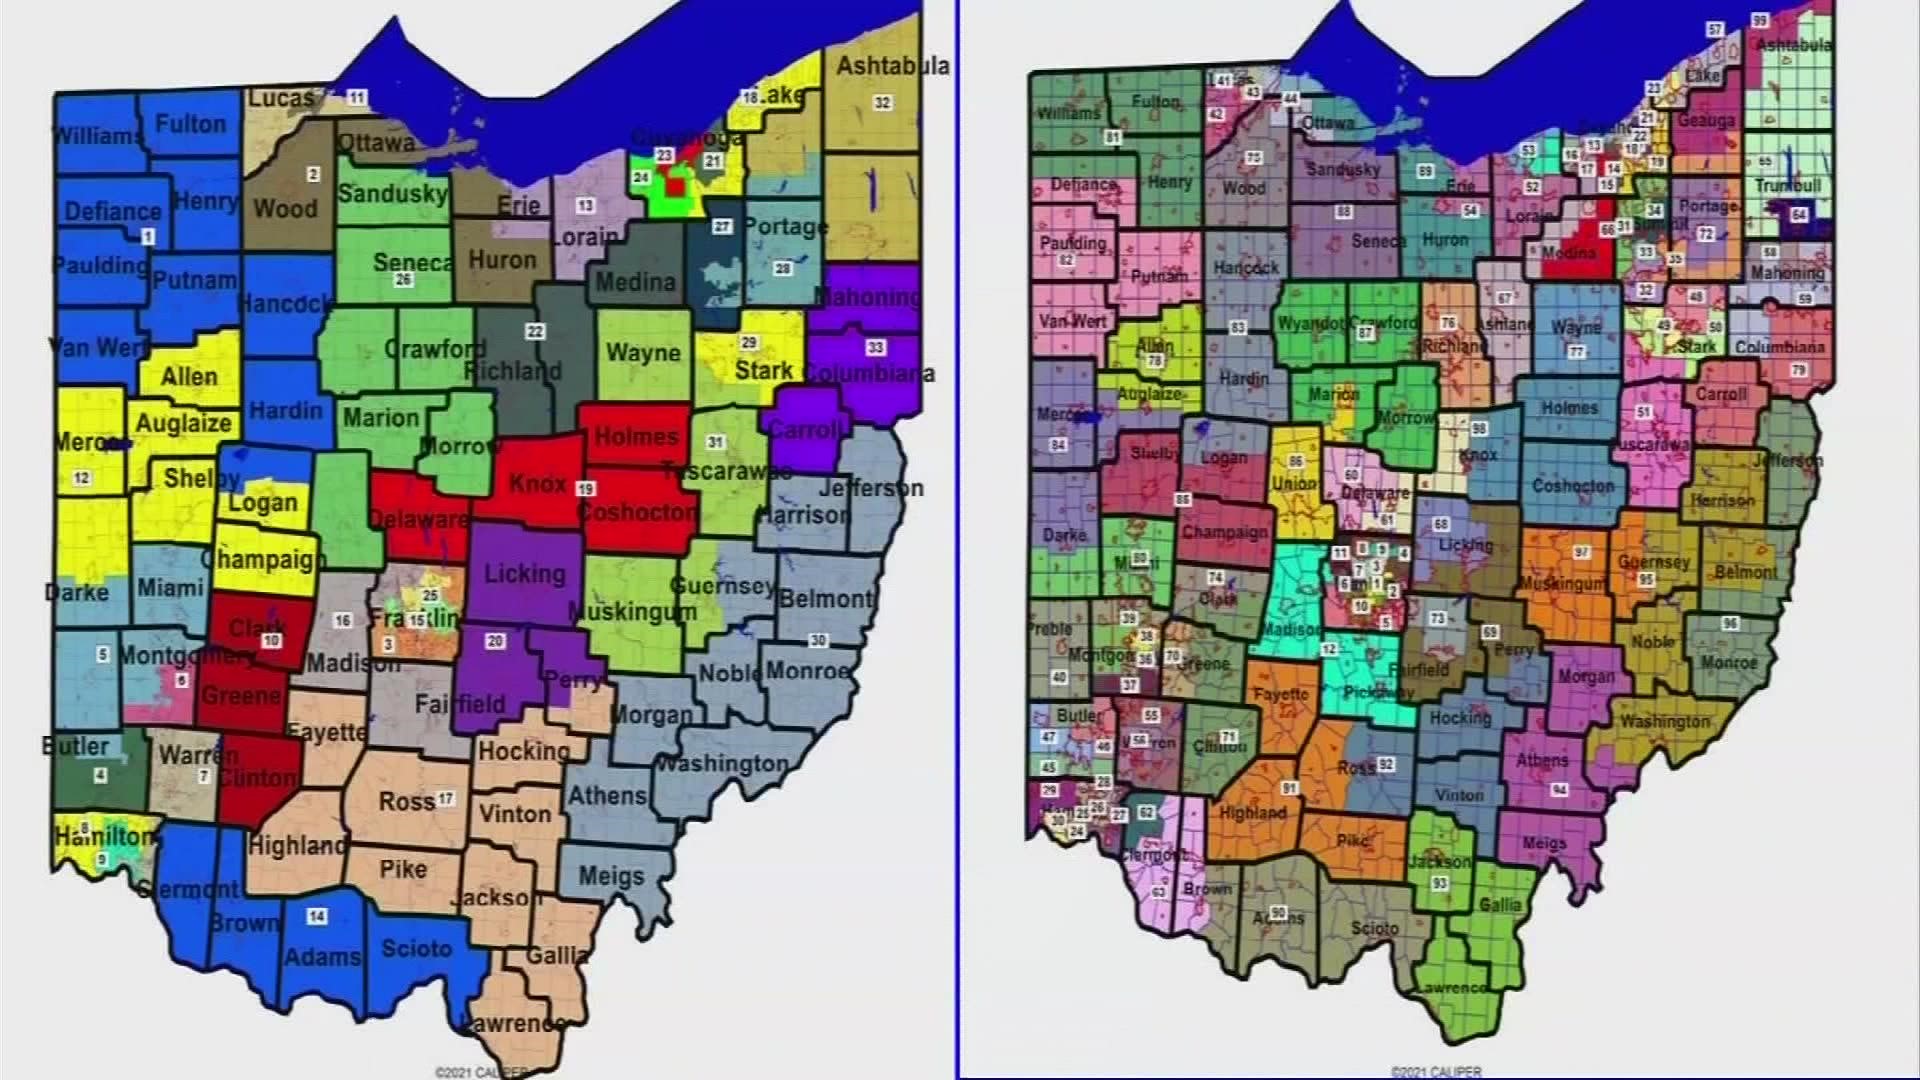 While the Ohio Supreme Court is sorting out issues with redistricting maps, boards of elections are getting ready for early voting next week.